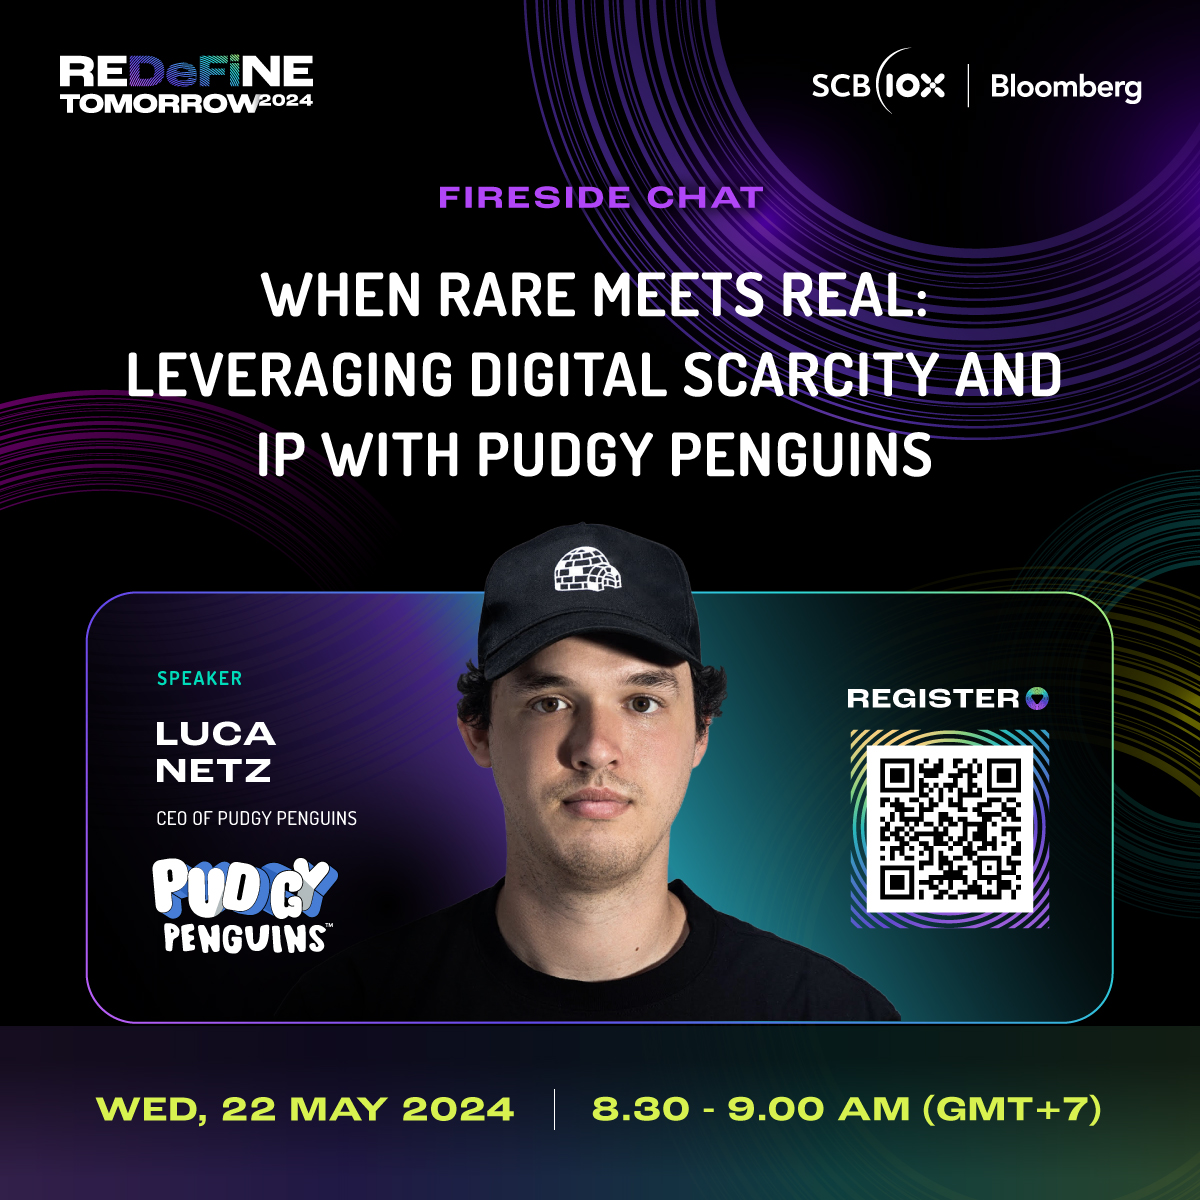 Meet the speaker at #REDeFiNETOMORROW2024 / 21-22 May 2024 Fireside Chat: When Rare Meets Real: Leveraging Digital Scarcity and IP with Pudgy Penguins @LucaNetz of @pudgypenguins Free ticket: bloombergevents.com/SCB10x_2024